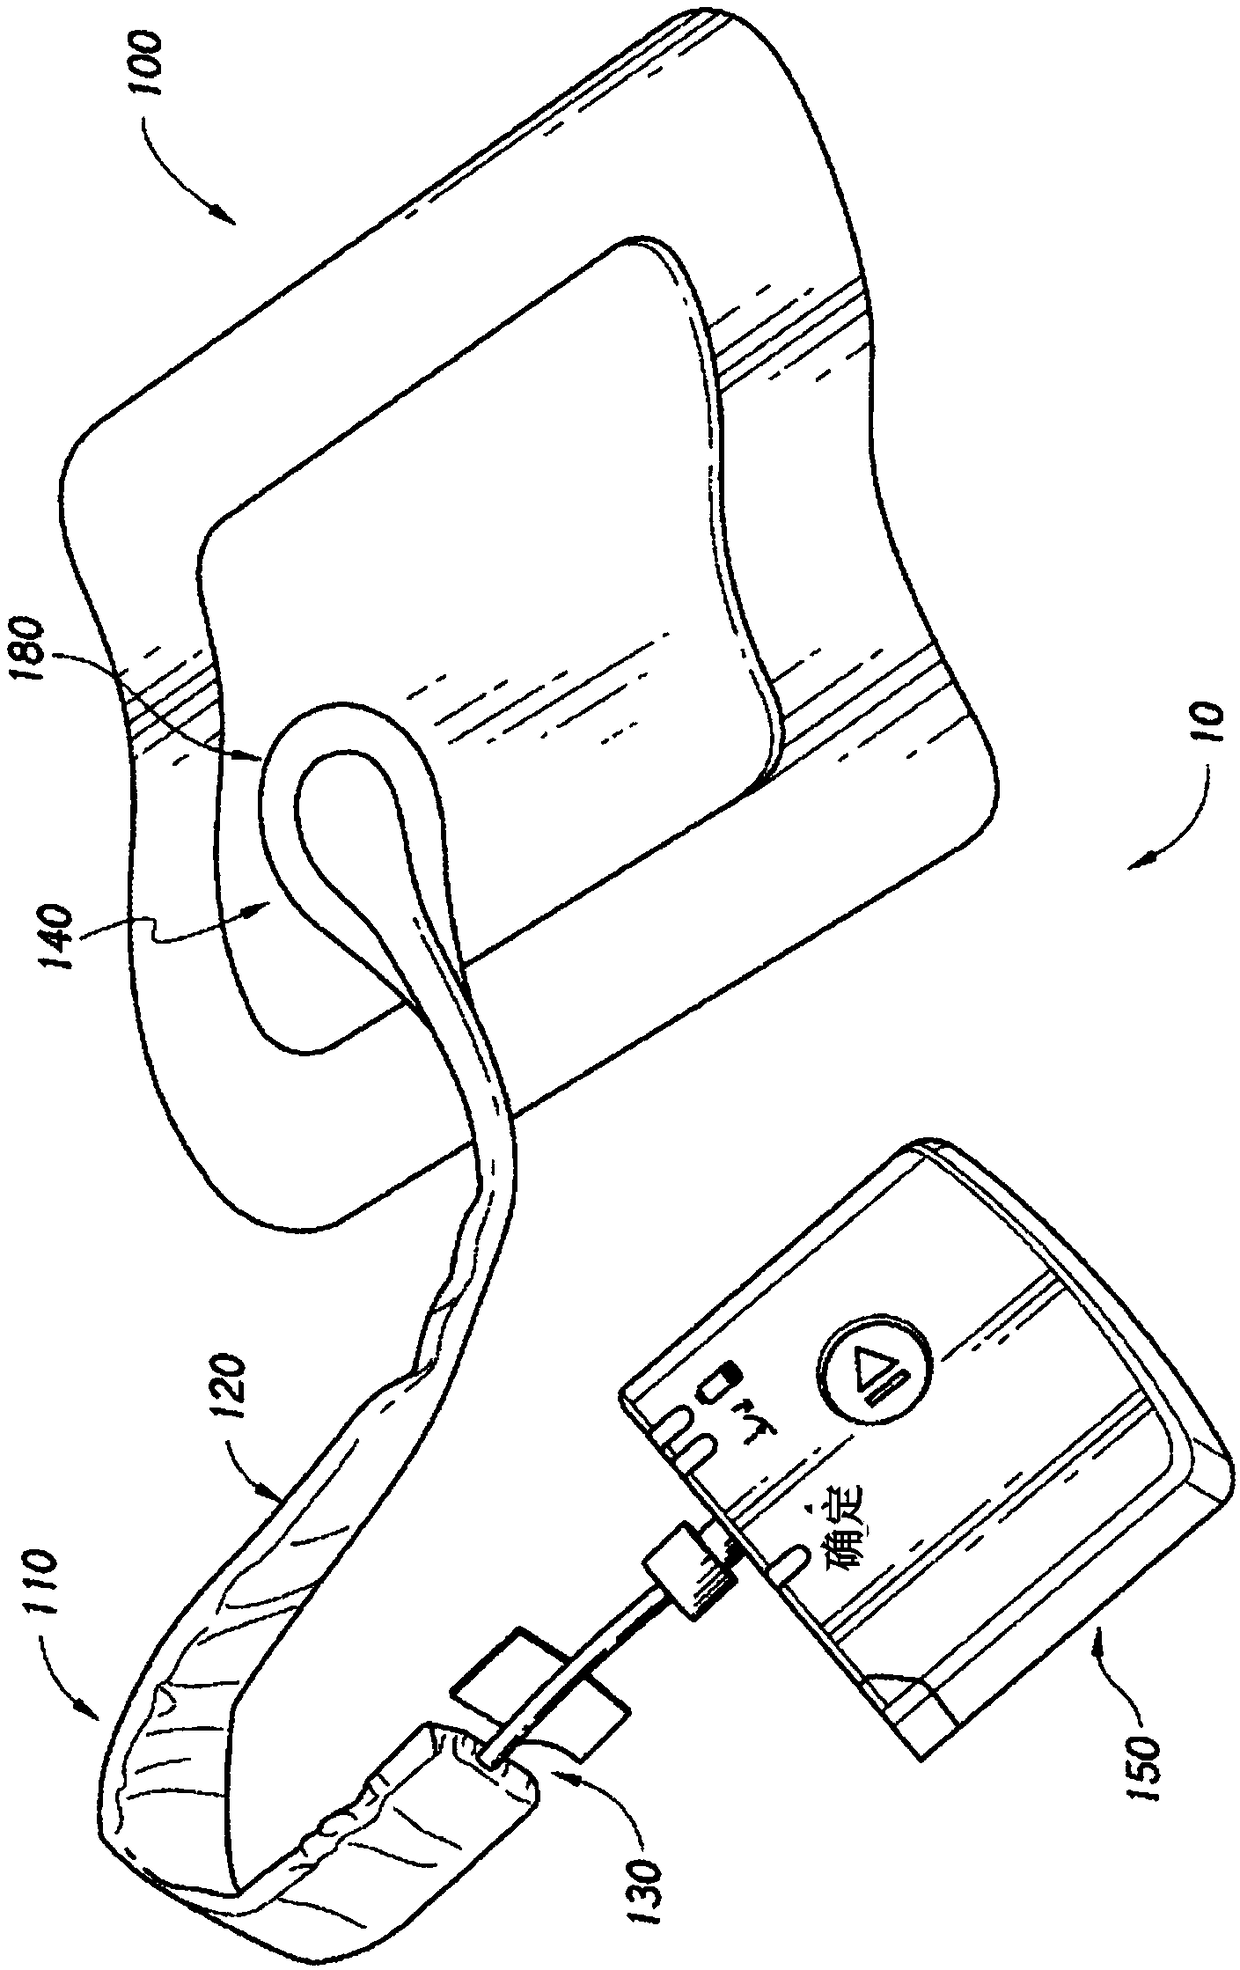 Sensor enabled wound monitoring and therapy apparatus